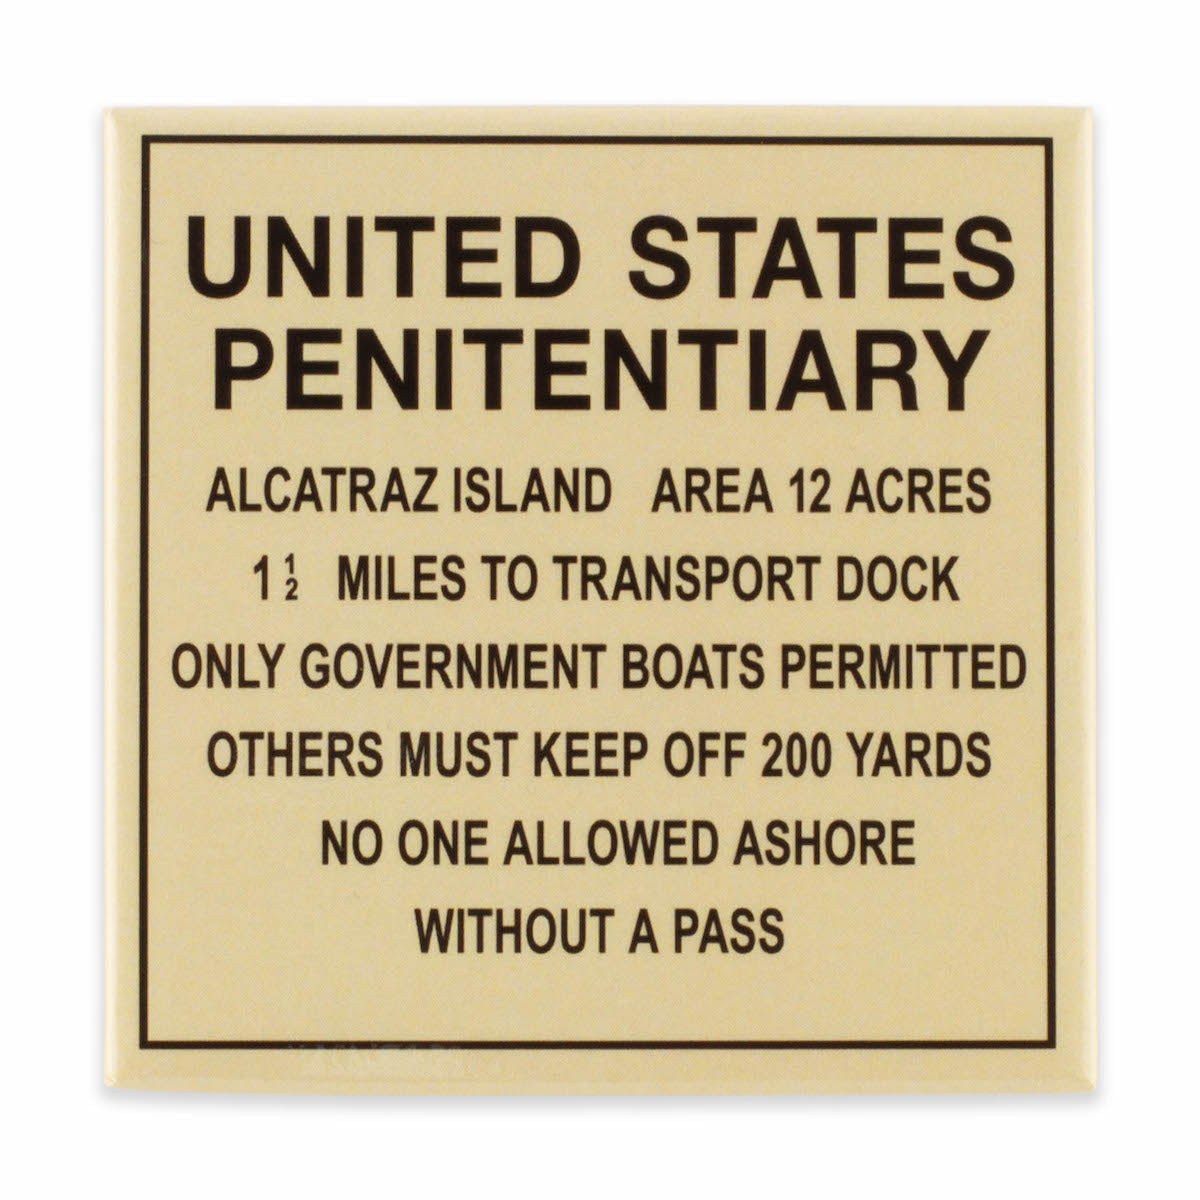 Square yellow magnet with illustration of U.S. Penitentiary Alcatraz warning sign in black: “Only government boats permitted, others must keep off 200 yards...” Etc.